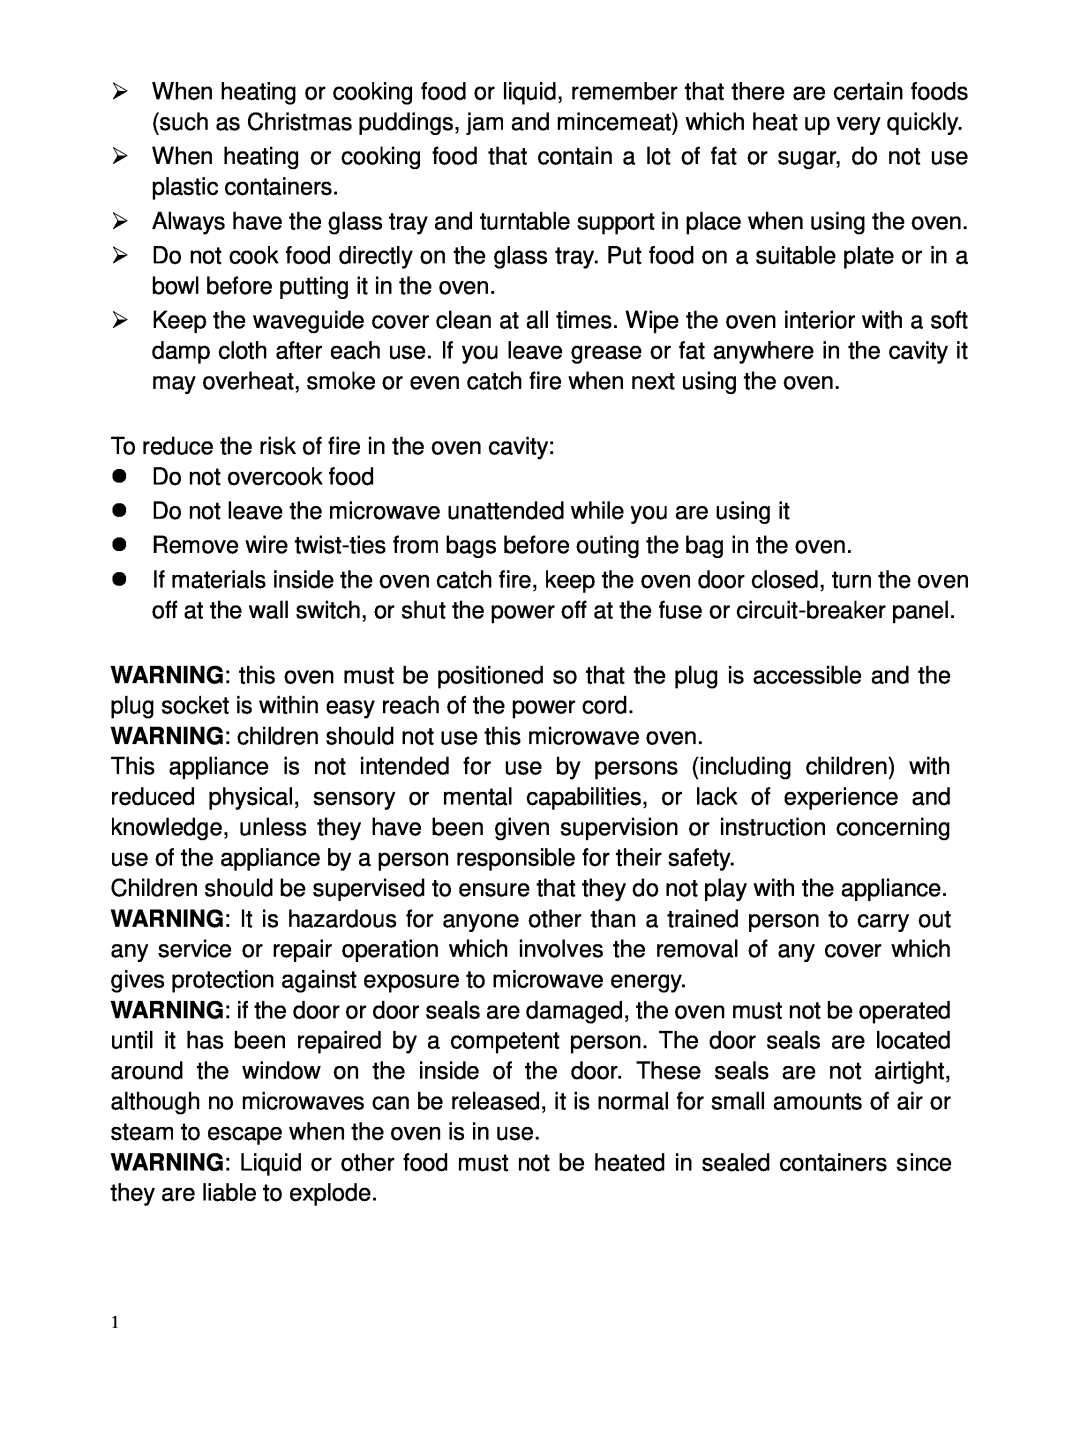 Russell Hobbs RHM2306 user manual To reduce the risk of fire in the oven cavity 